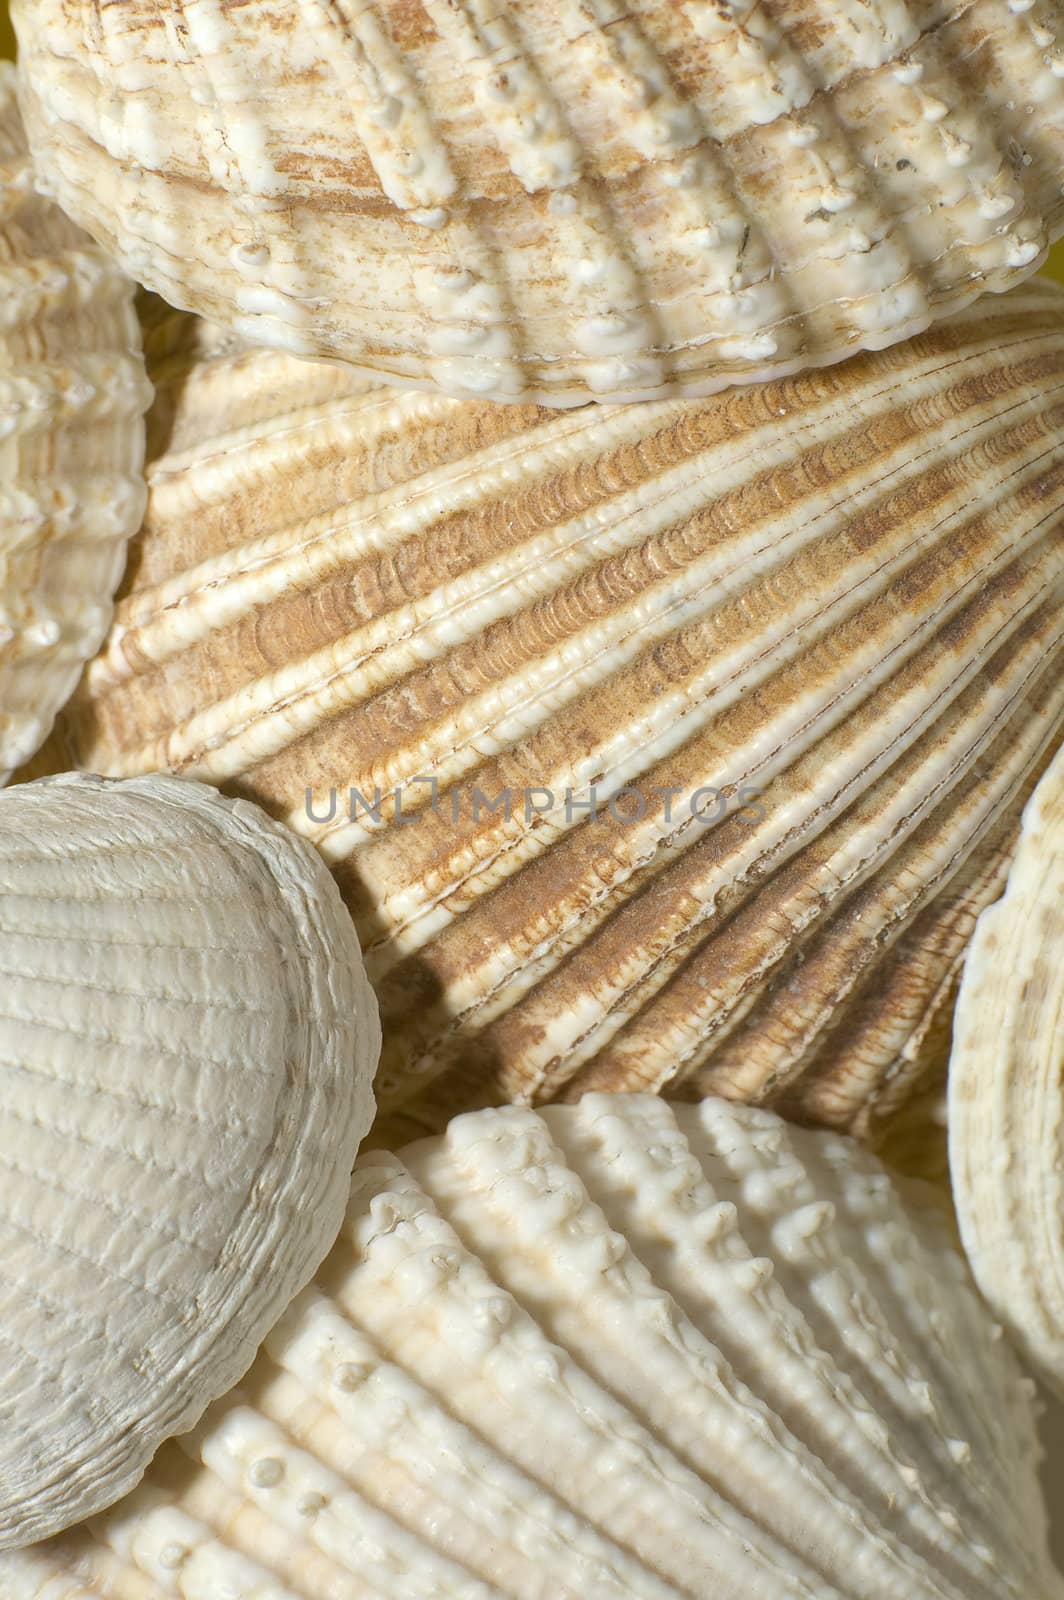 several sea mussels detail photo